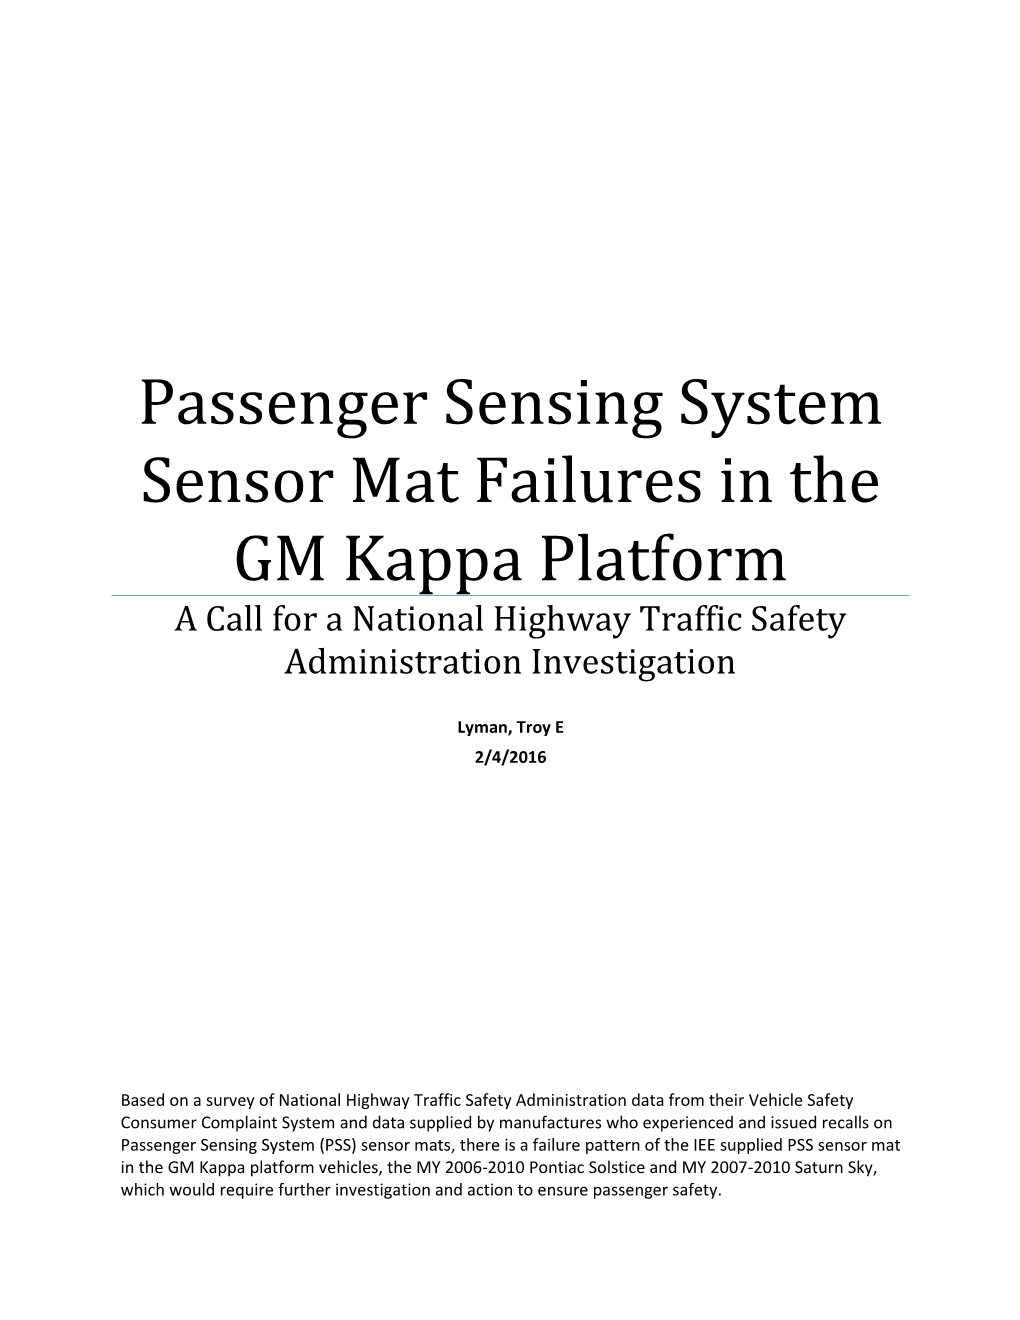 Passenger Sensing System Sensor Mat Failures in the GM Kappa Platform a Call for a National Highway Traffic Safety Administration Investigation